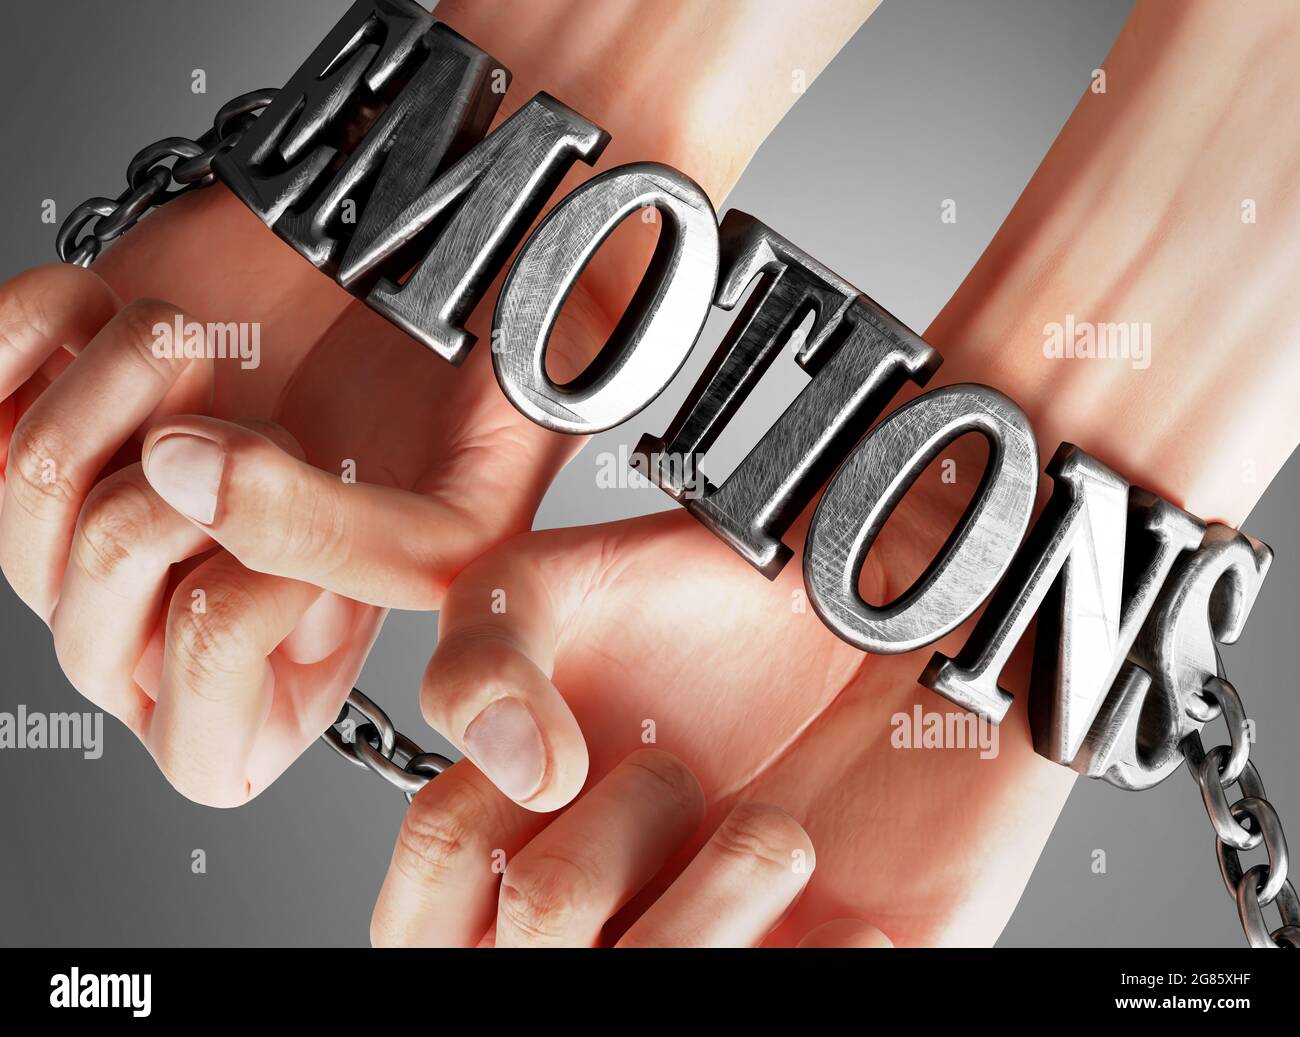 Emotions restricting life and freedom, bringing enslavement, pain and misery to human life - symbolized by chains and shackles made of metal word Emot Stock Photo